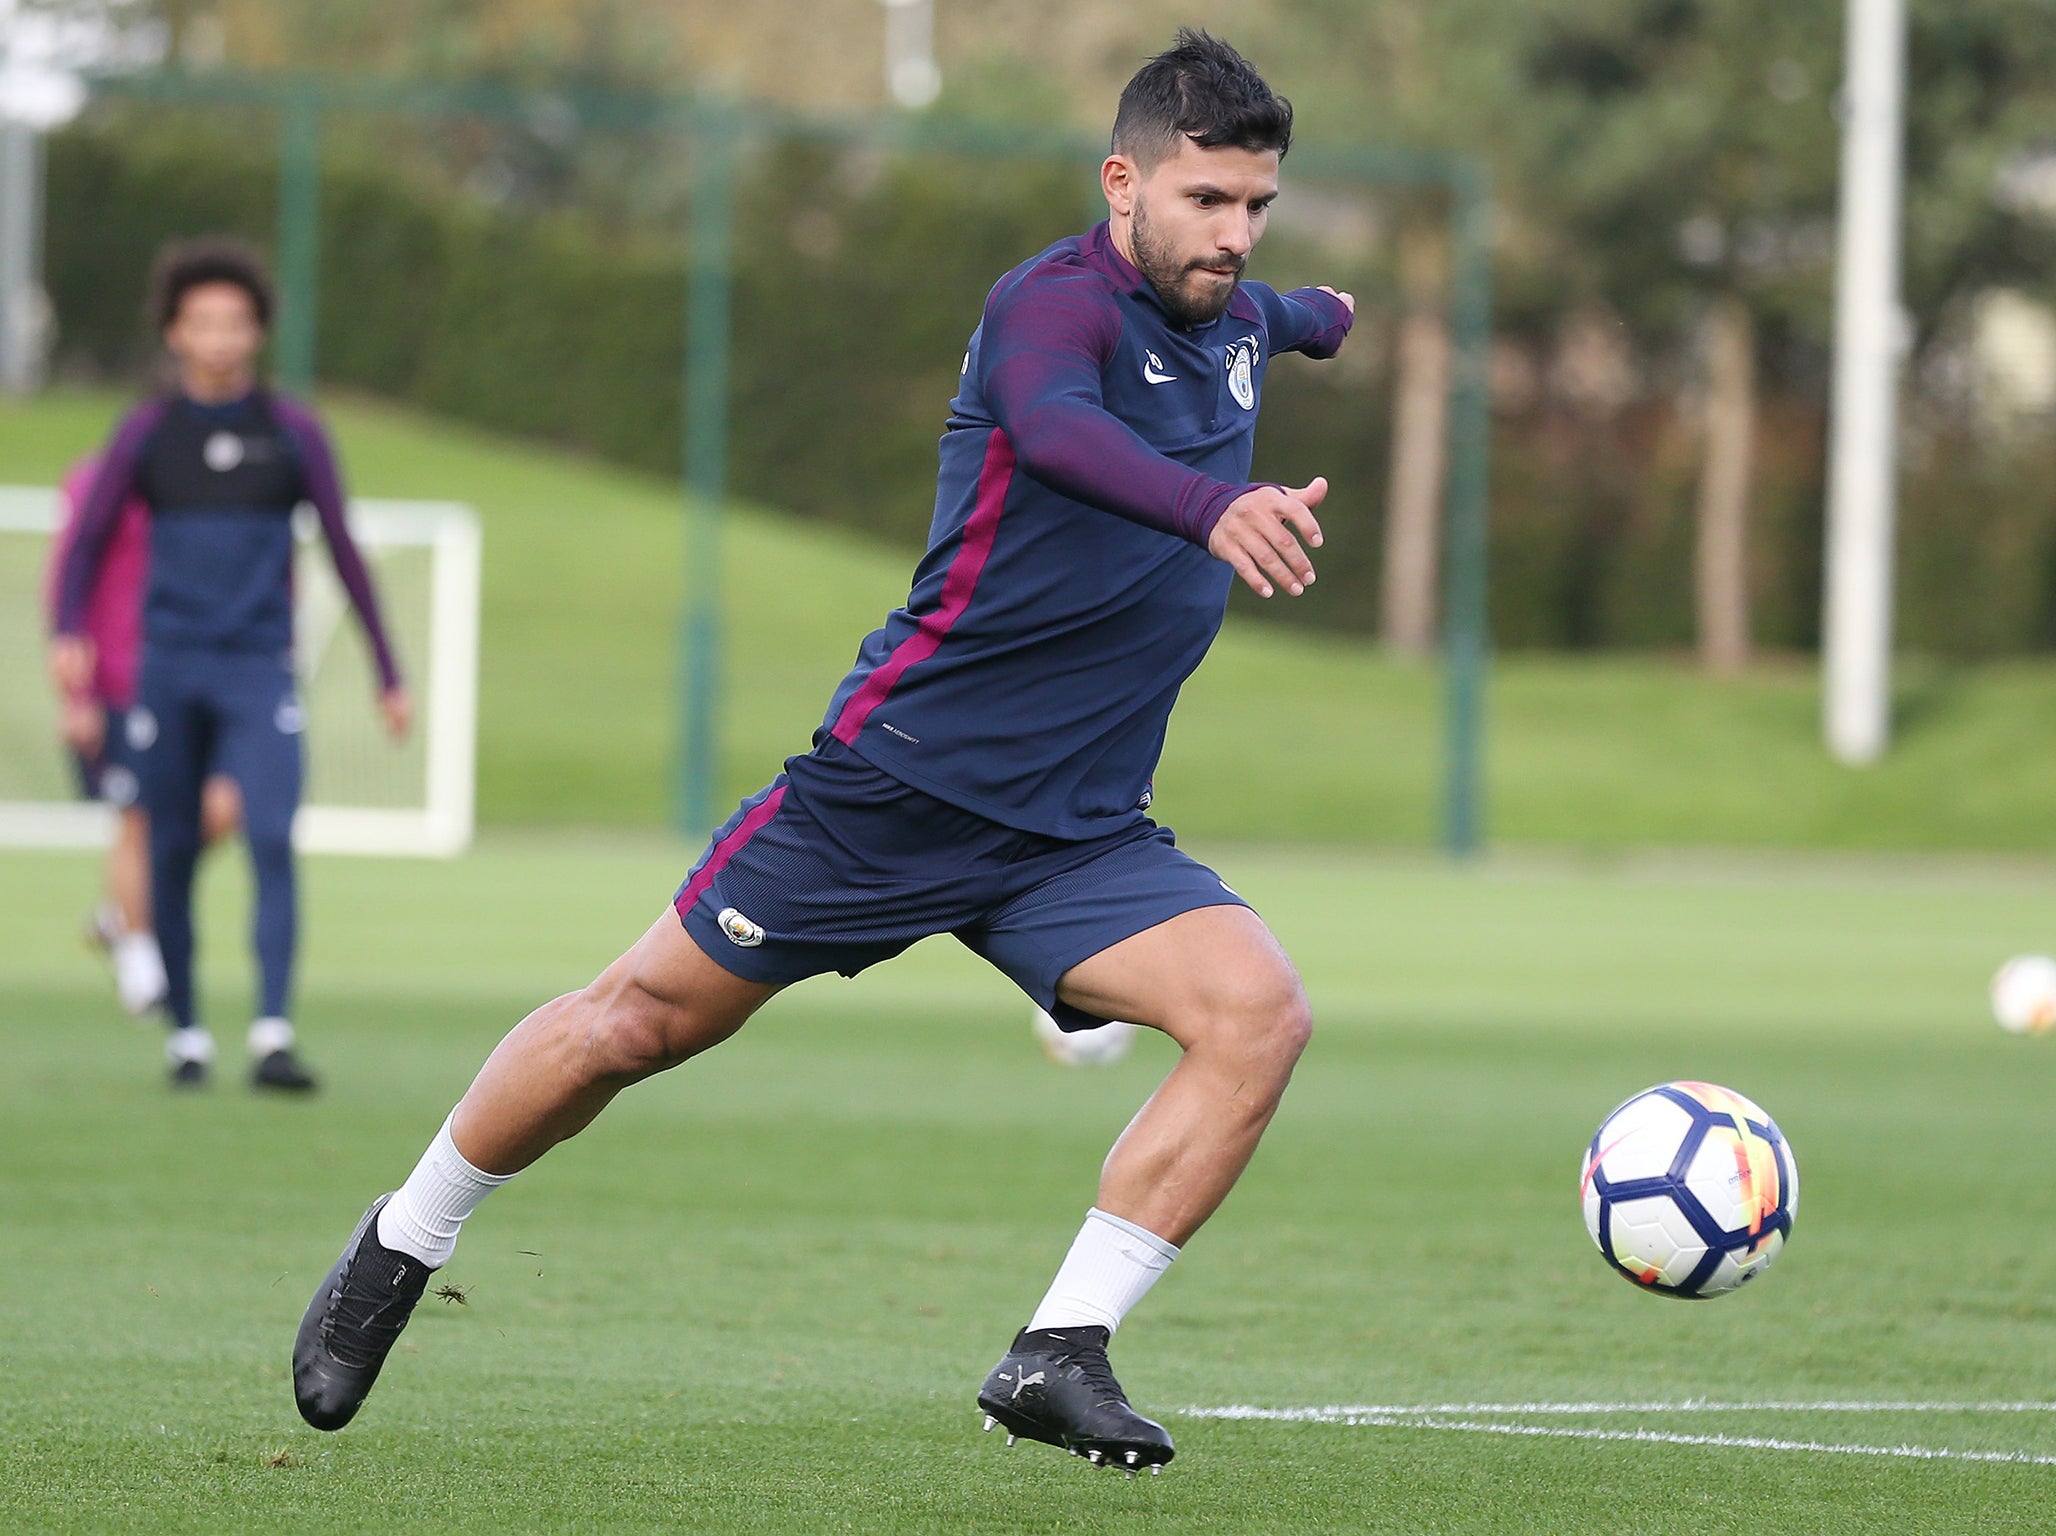 Aguero has returned to training for Manchester City